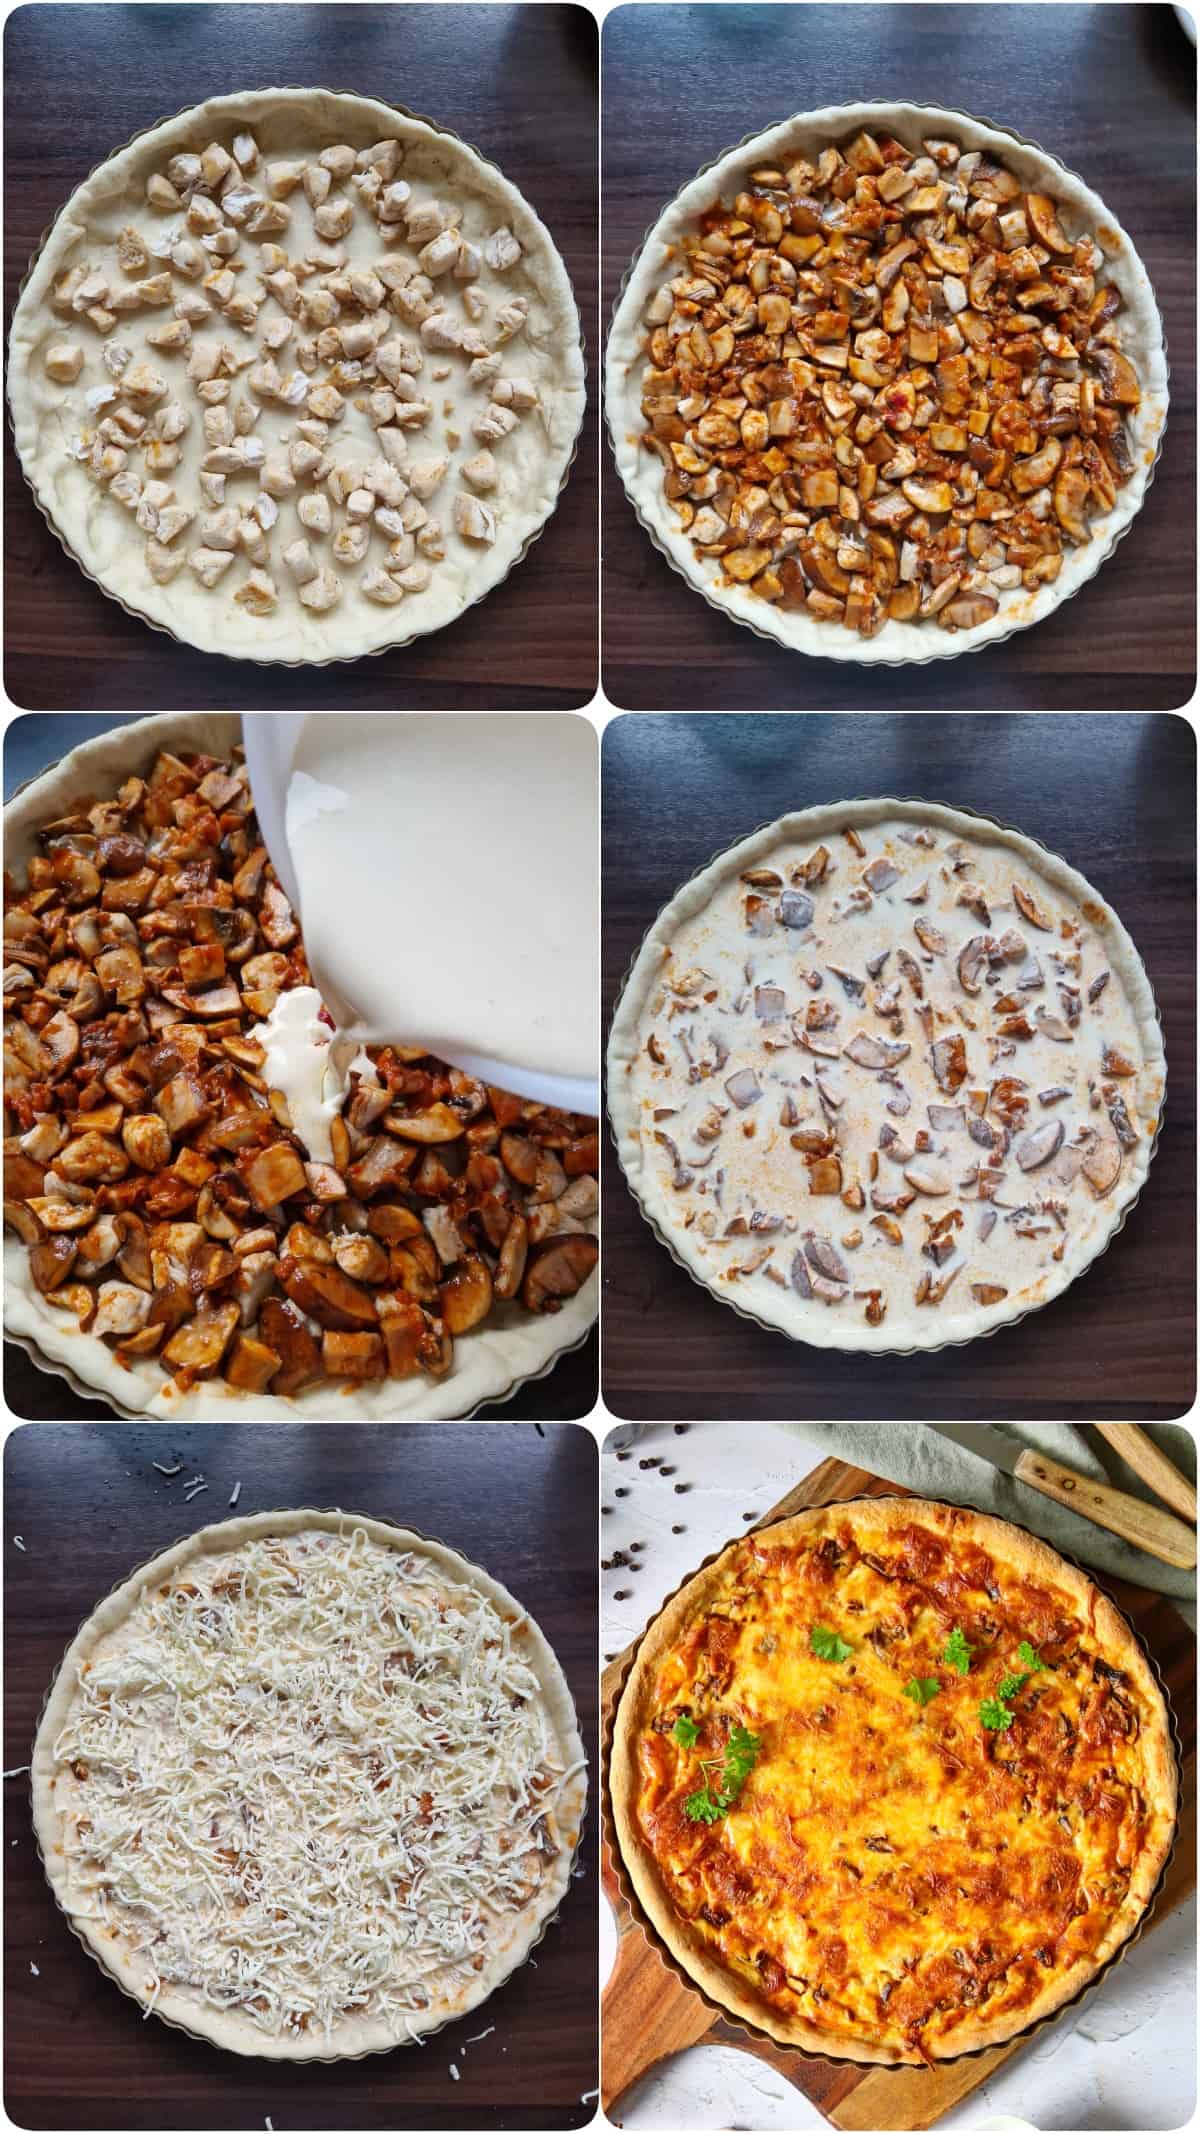 A collage of the preparation steps for quiche with chicken and mushrooms.